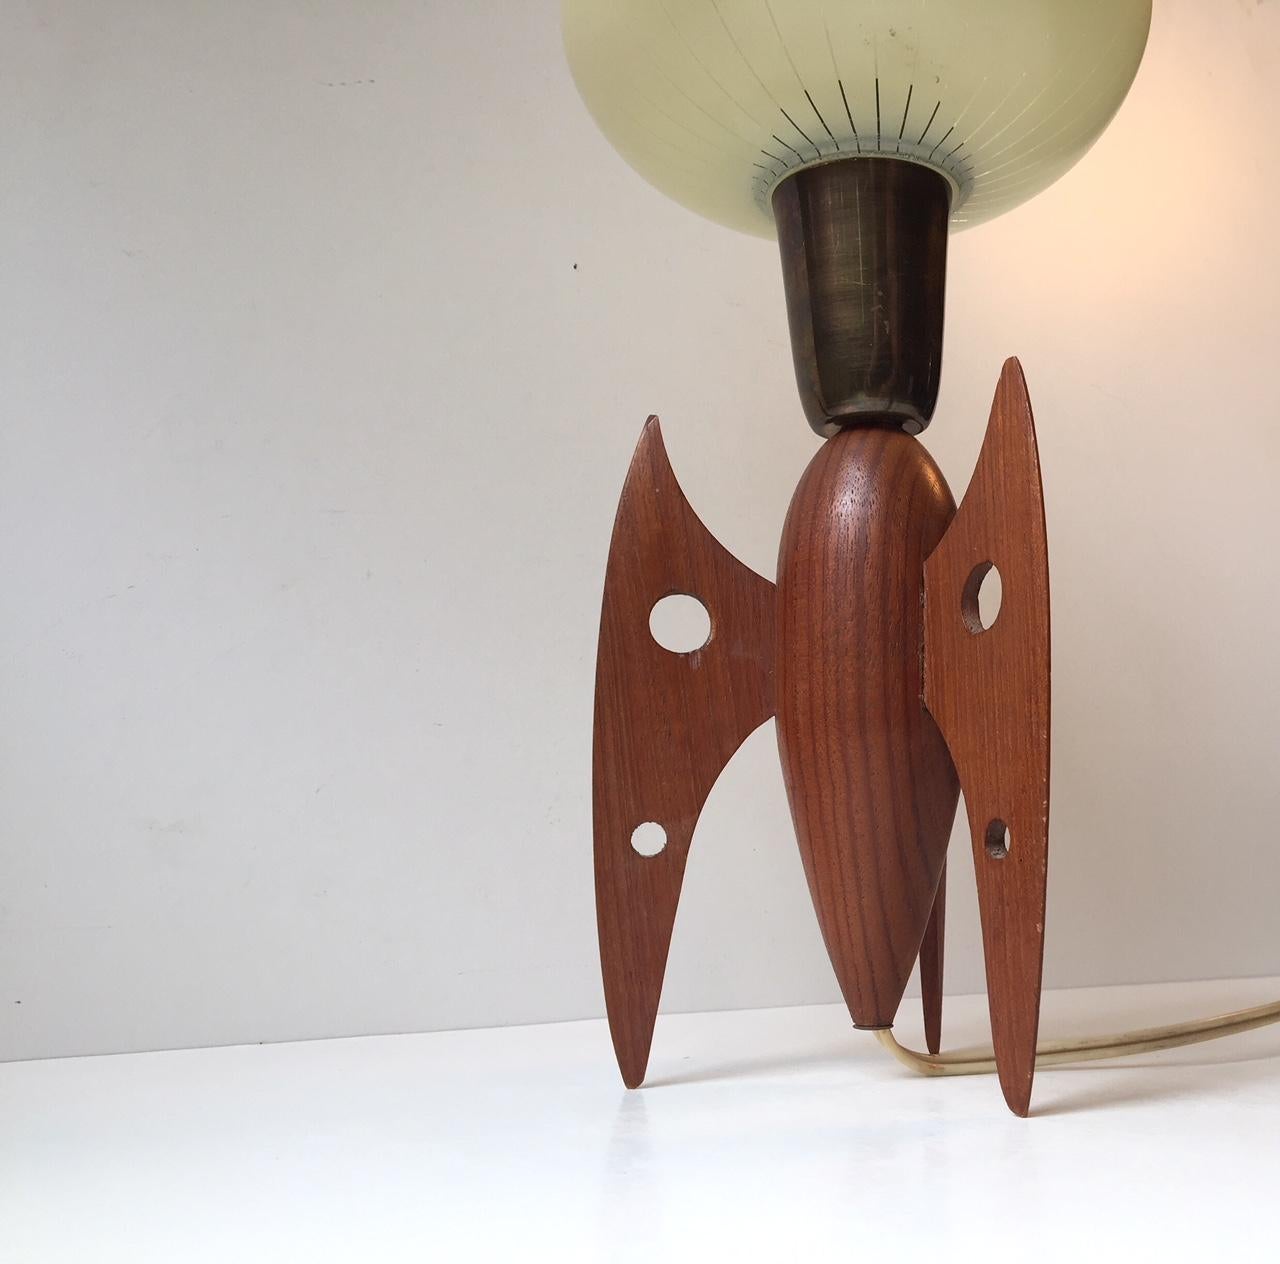 Unique professionally crafted Rocket table light. It is made of teak and has a brass supported single layered pin-striped glass shade from the period. It was made of excess furniture teak by a Scandinavian Cabinetmaker during the 1950s.